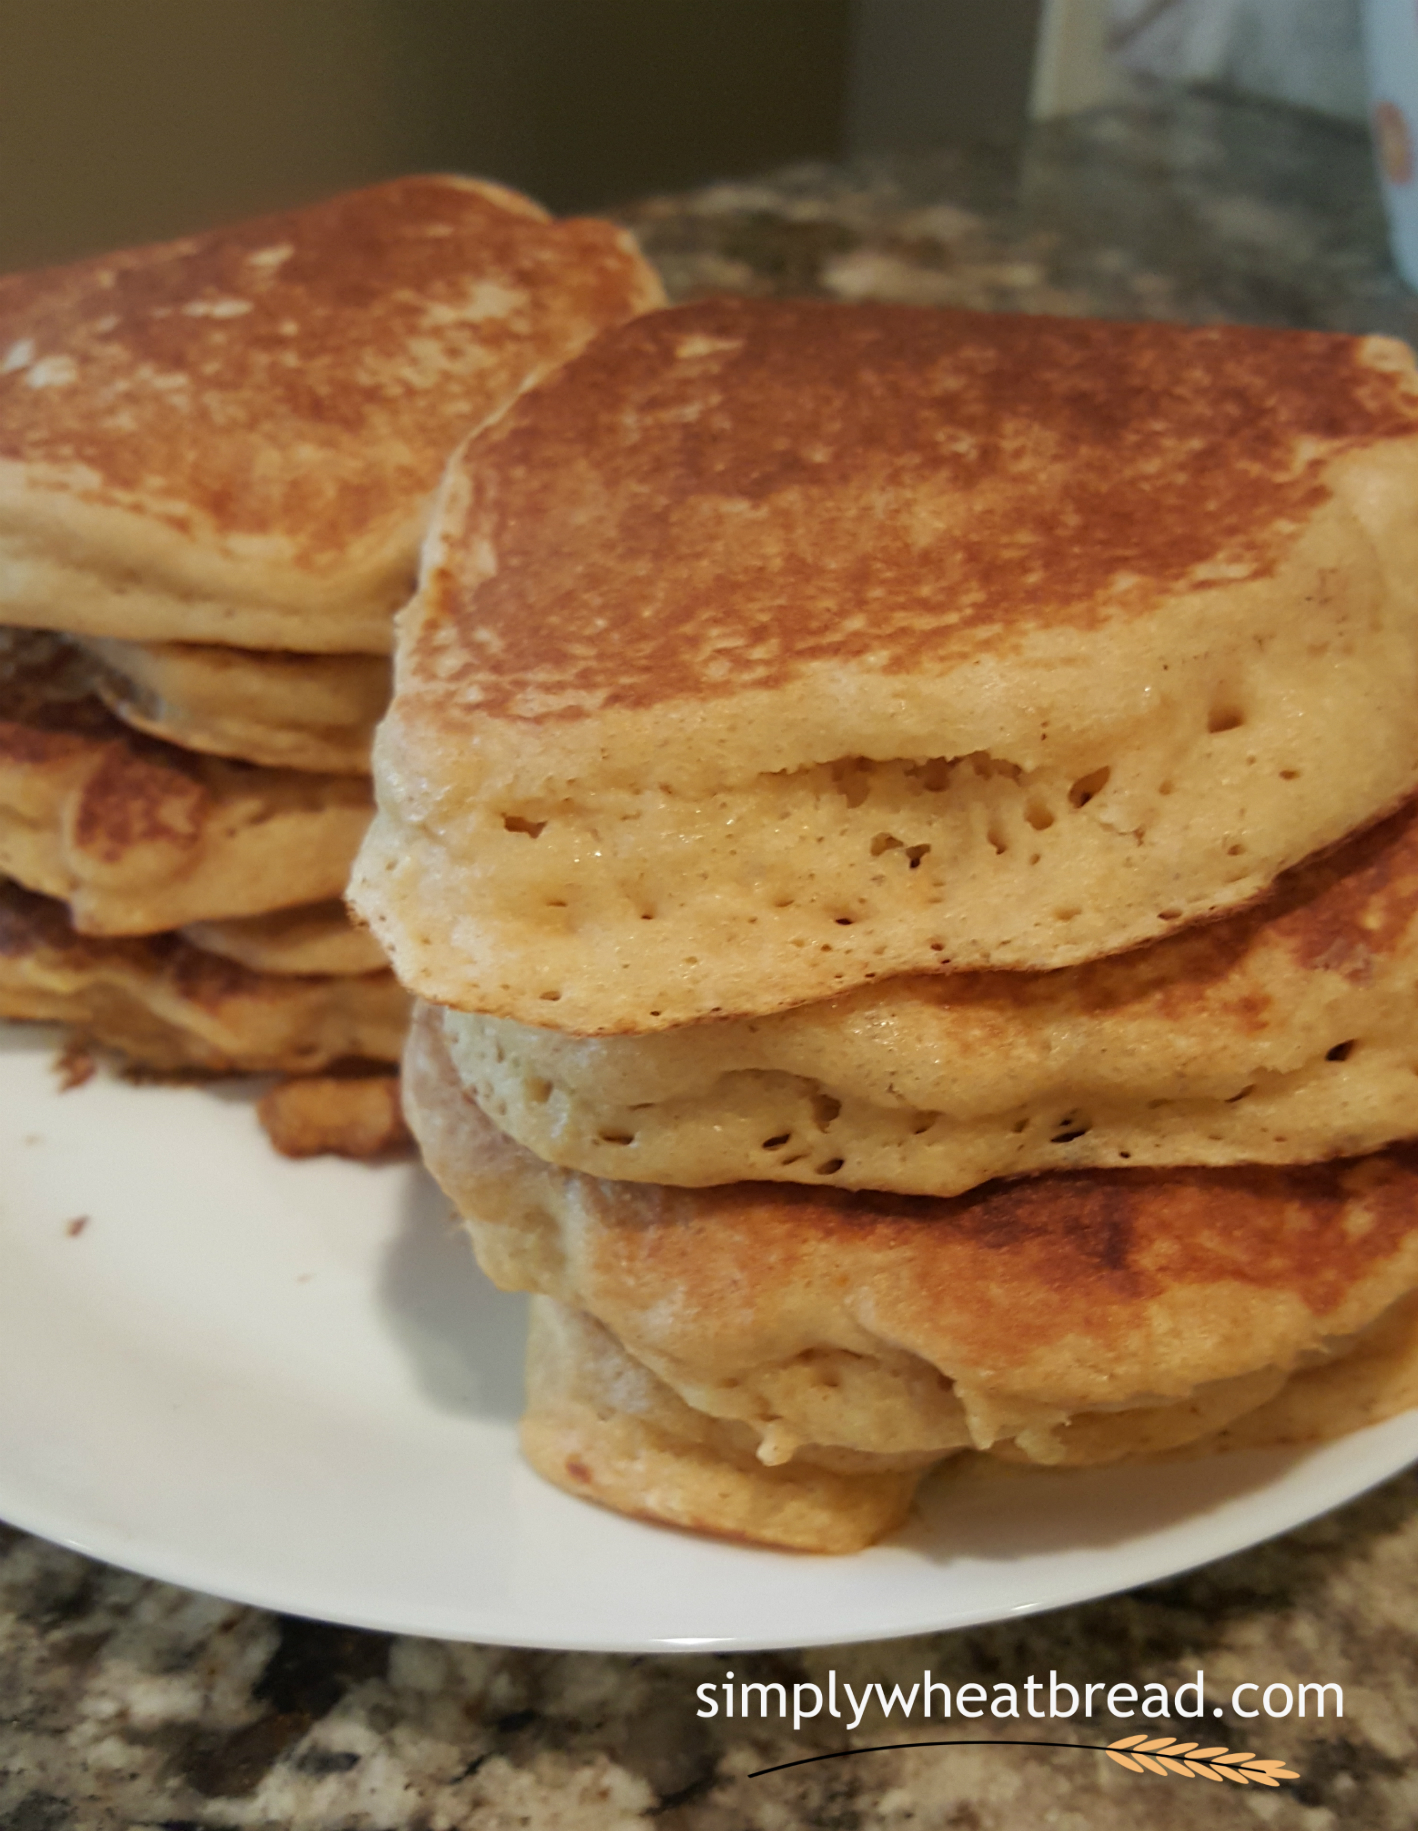 100% whole wheat pancakes. Best taste due to one special ingredient.